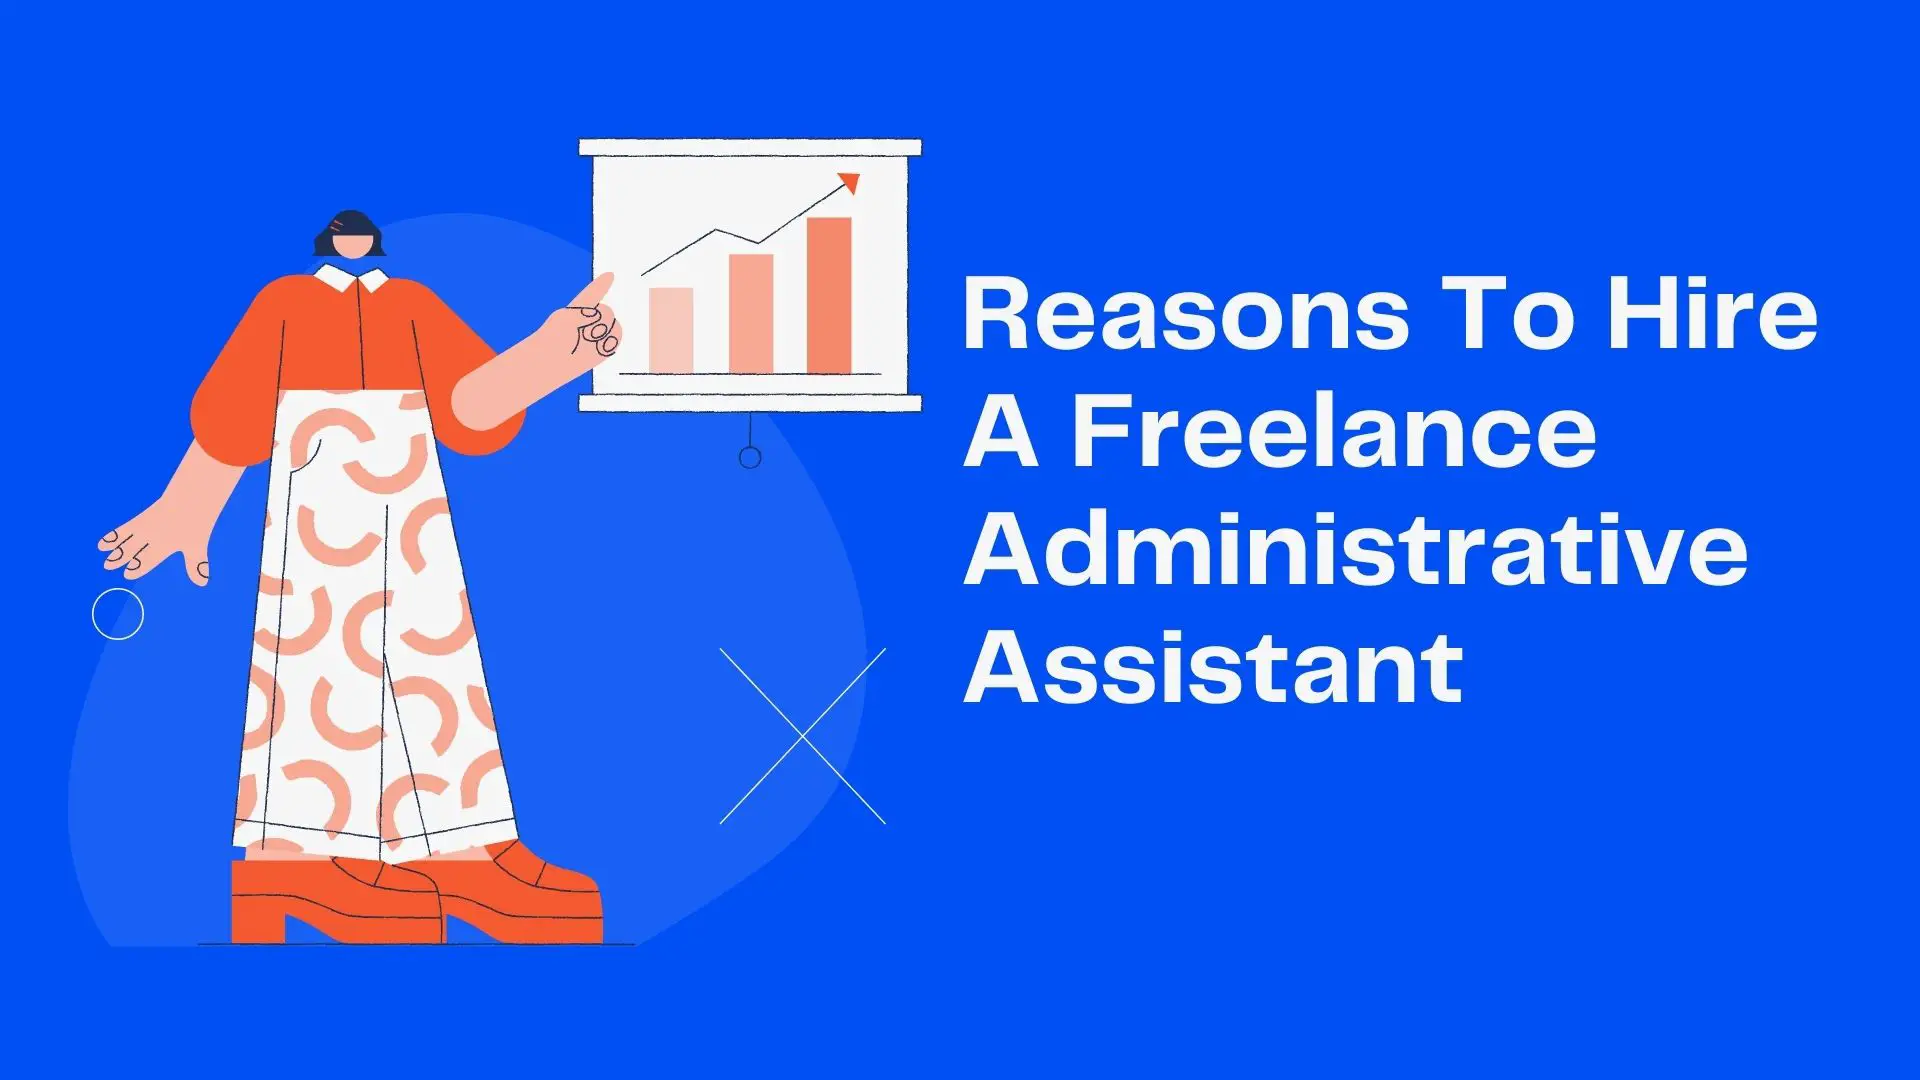 Reasons To Hire A Freelance Administrative Assistant